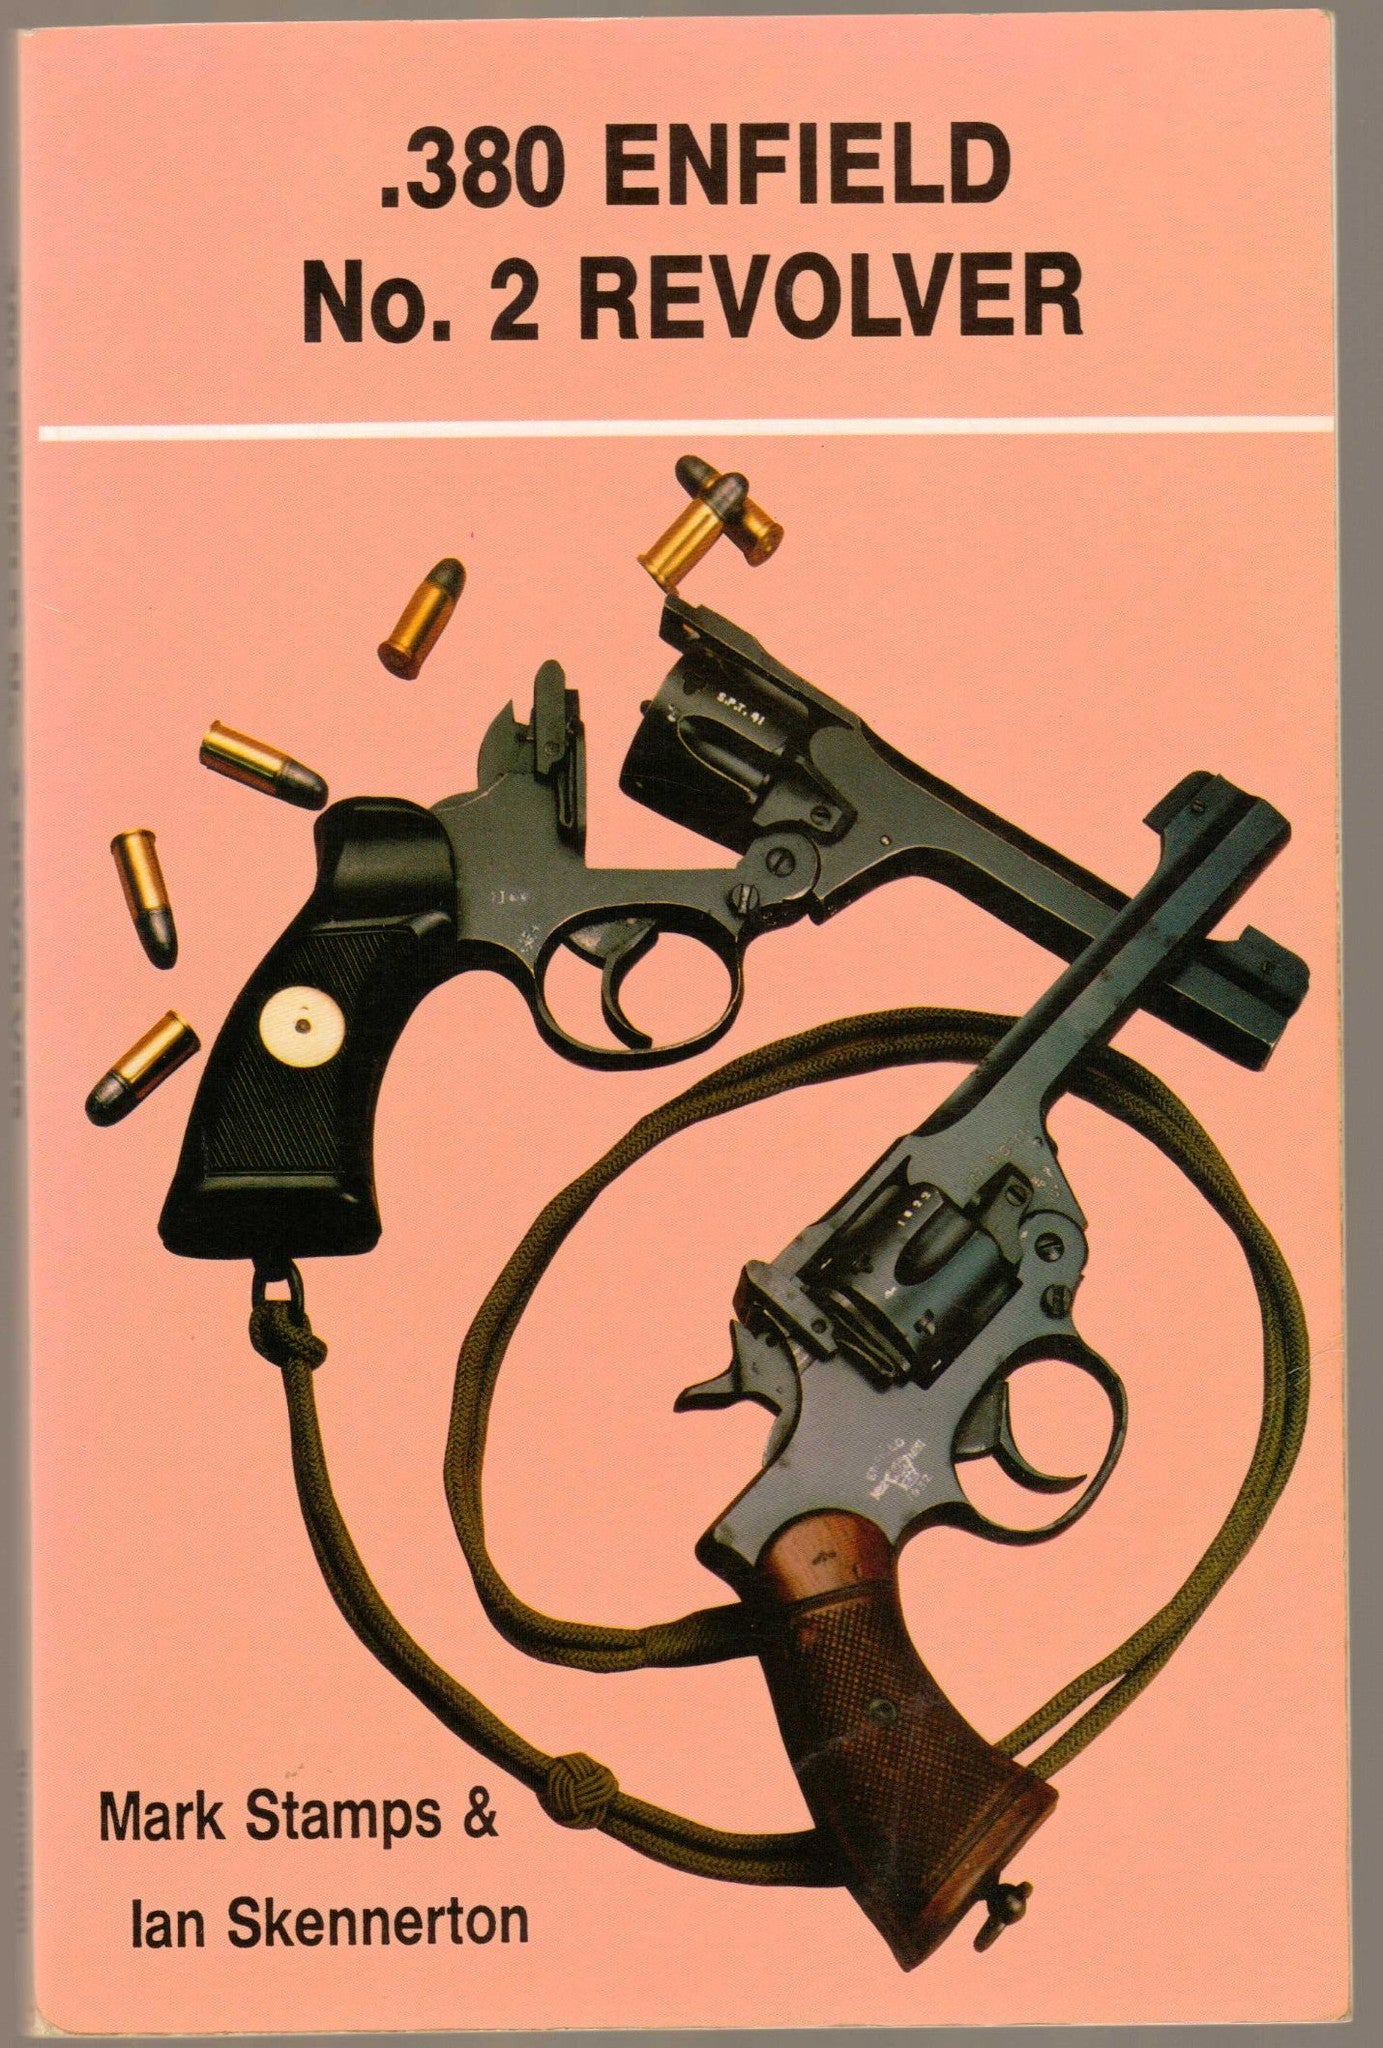 ".380 Enfield No.2 Revolver " by Mark Stamps and Ian Skennerton